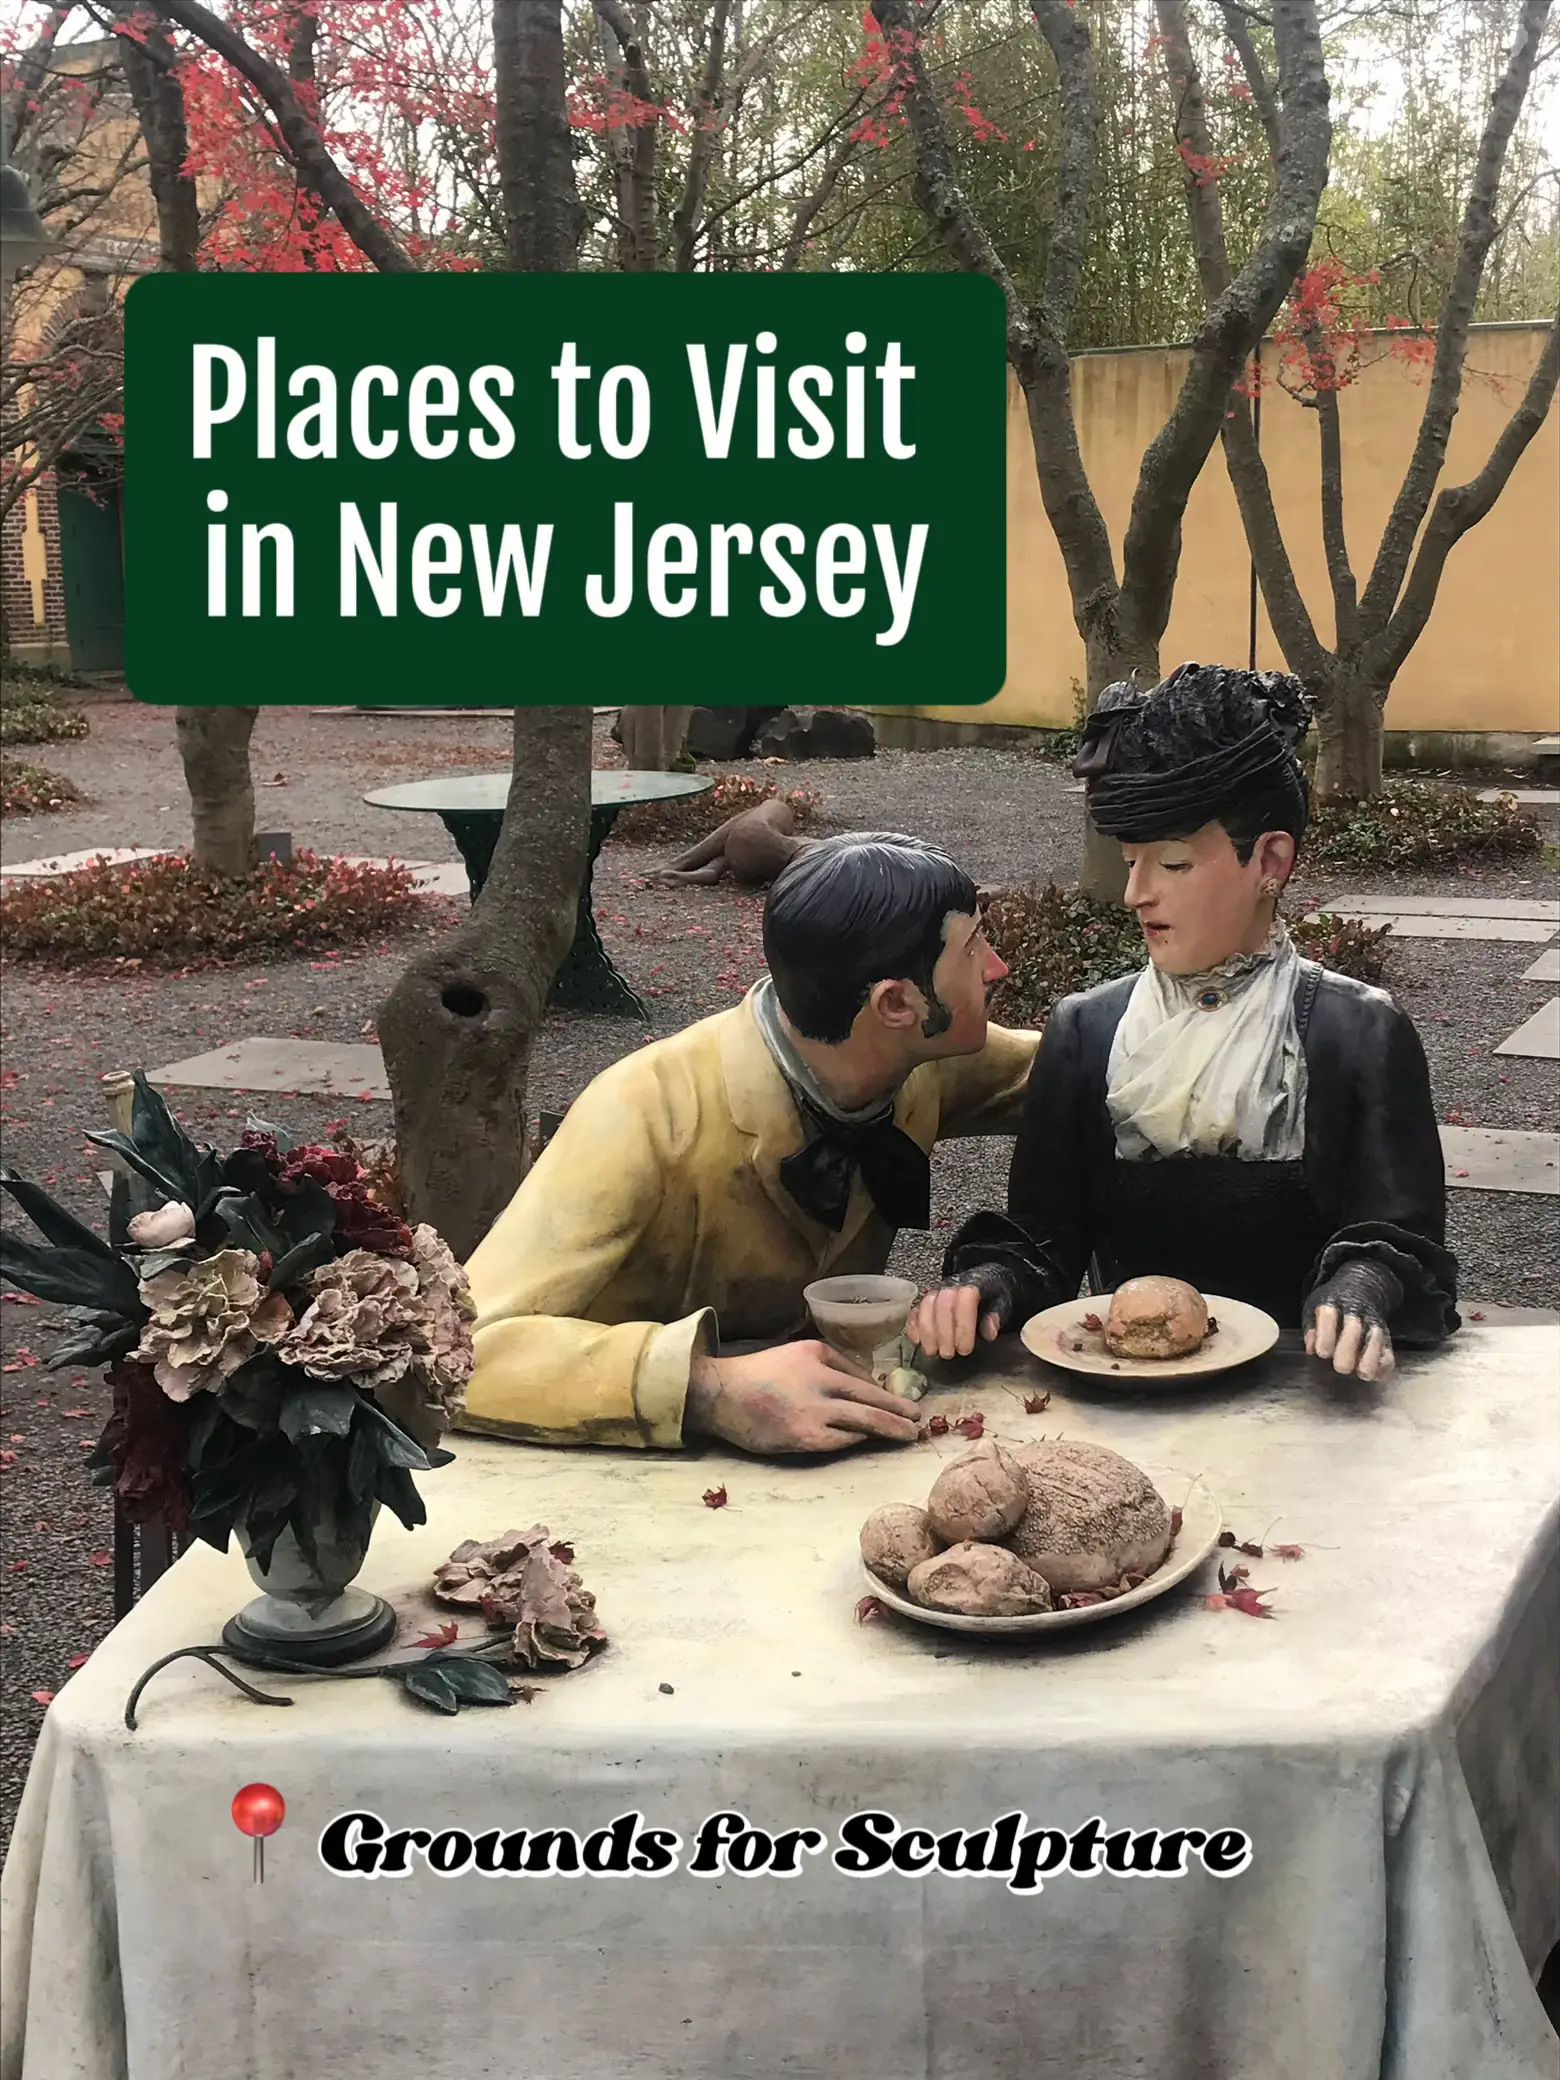 Places to Visit in NJ: Grounds for Sculpture's images